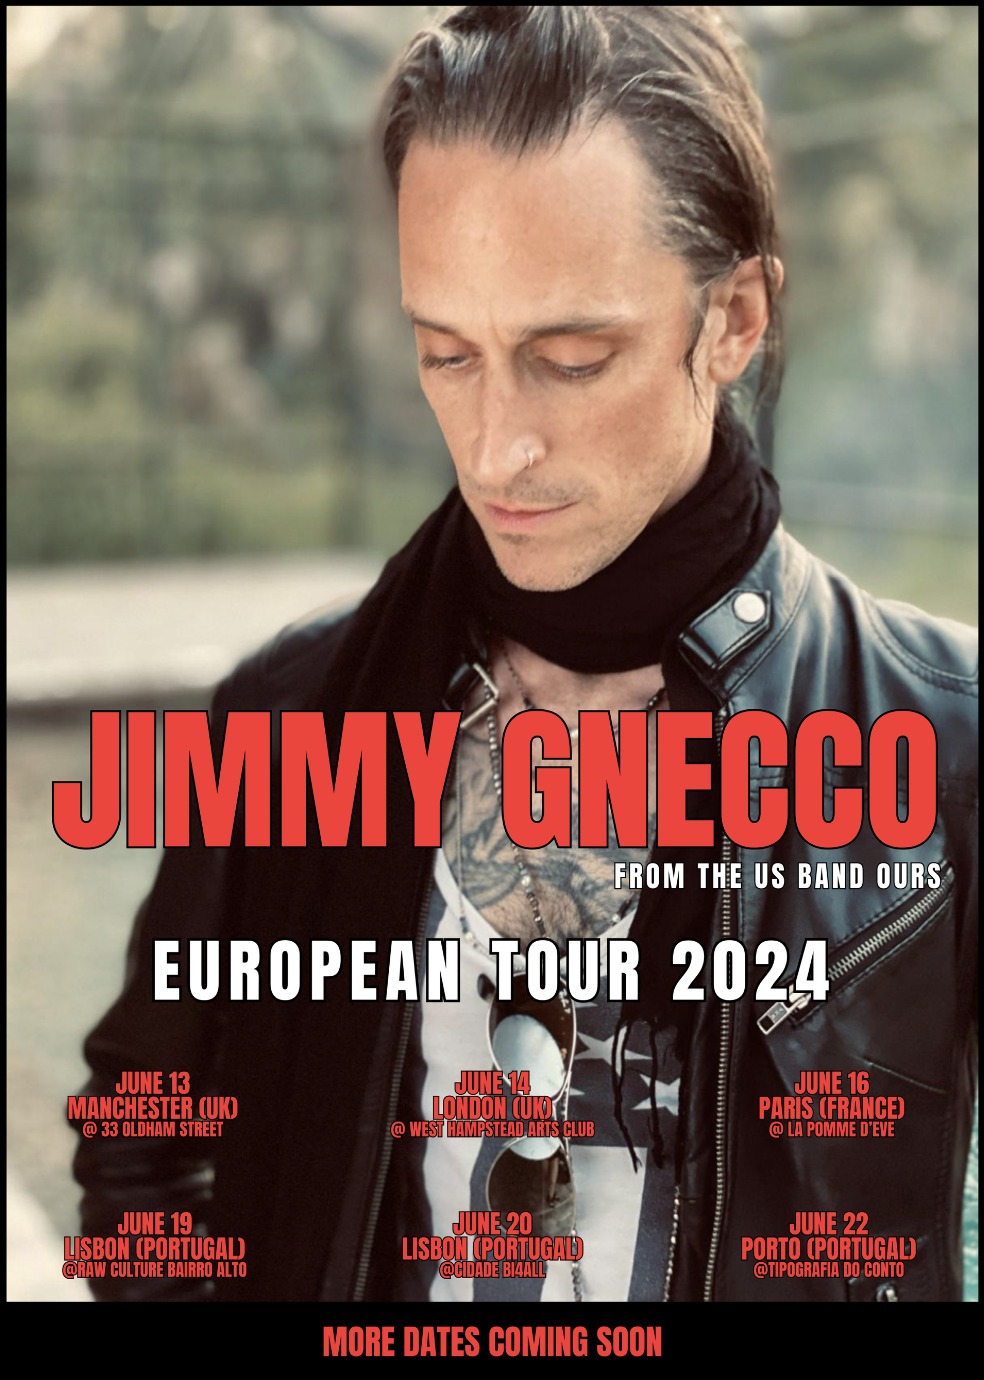 More European Dates Added!